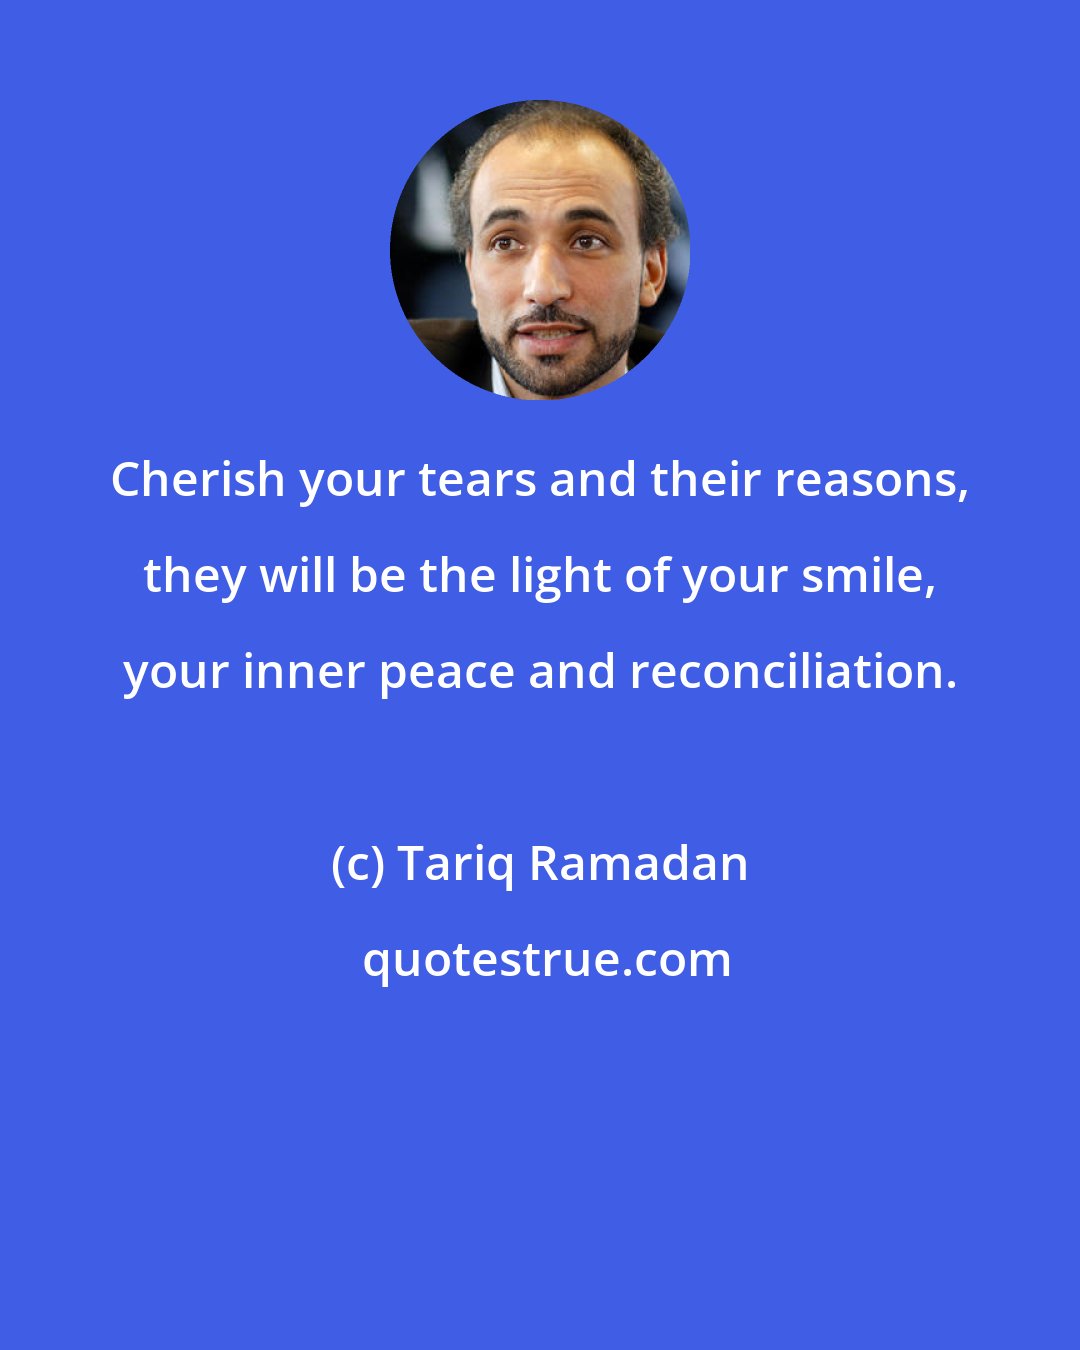 Tariq Ramadan: Cherish your tears and their reasons, they will be the light of your smile, your inner peace and reconciliation.